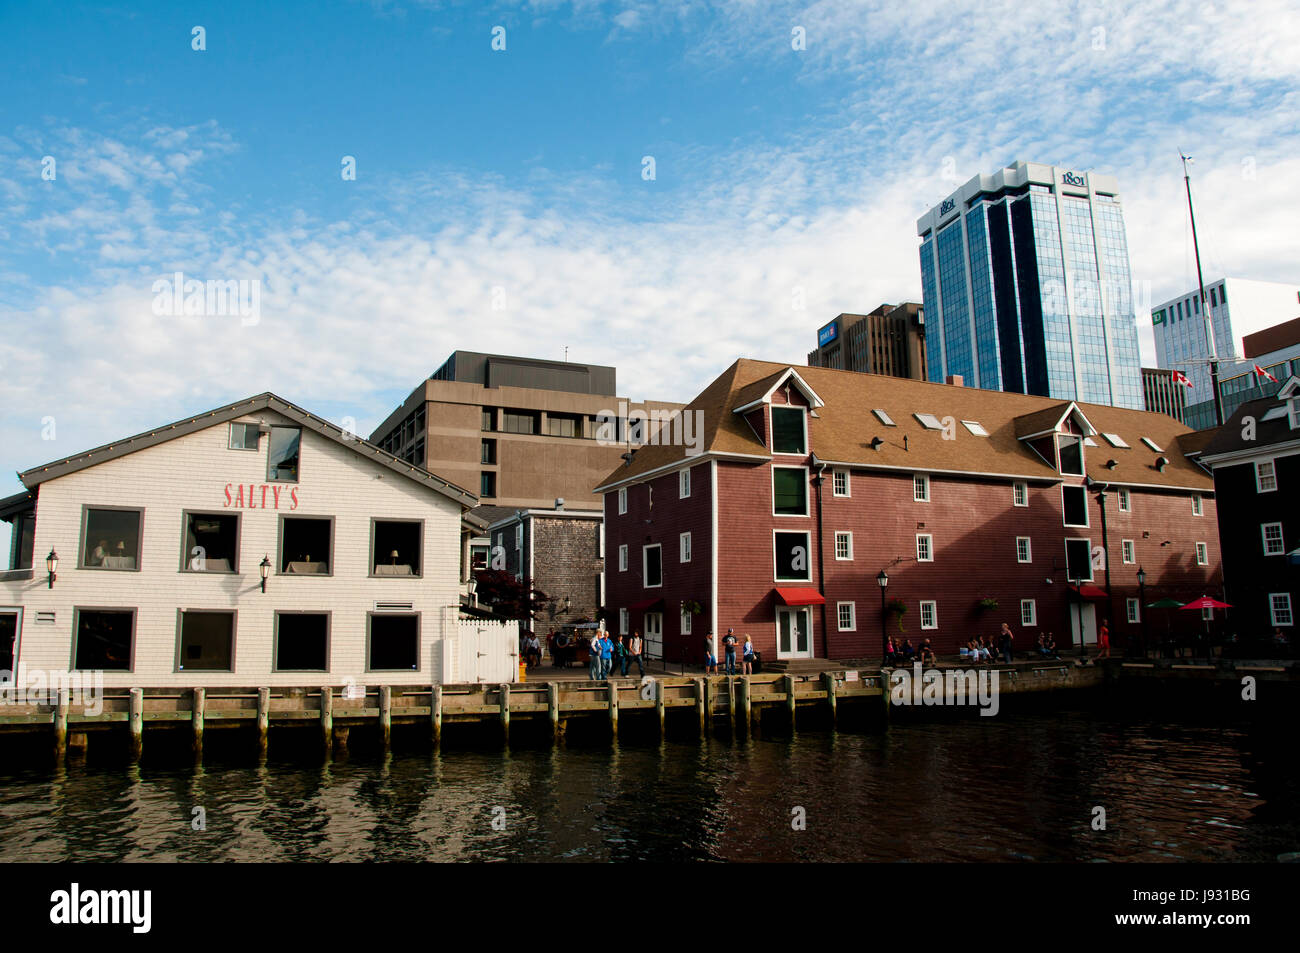 HALIFAX, CANADA - August 13, 2016:  The Halifax Waterfront Boardwalk is a public footpath and a tourist destination popular for its shops and restaura Stock Photo